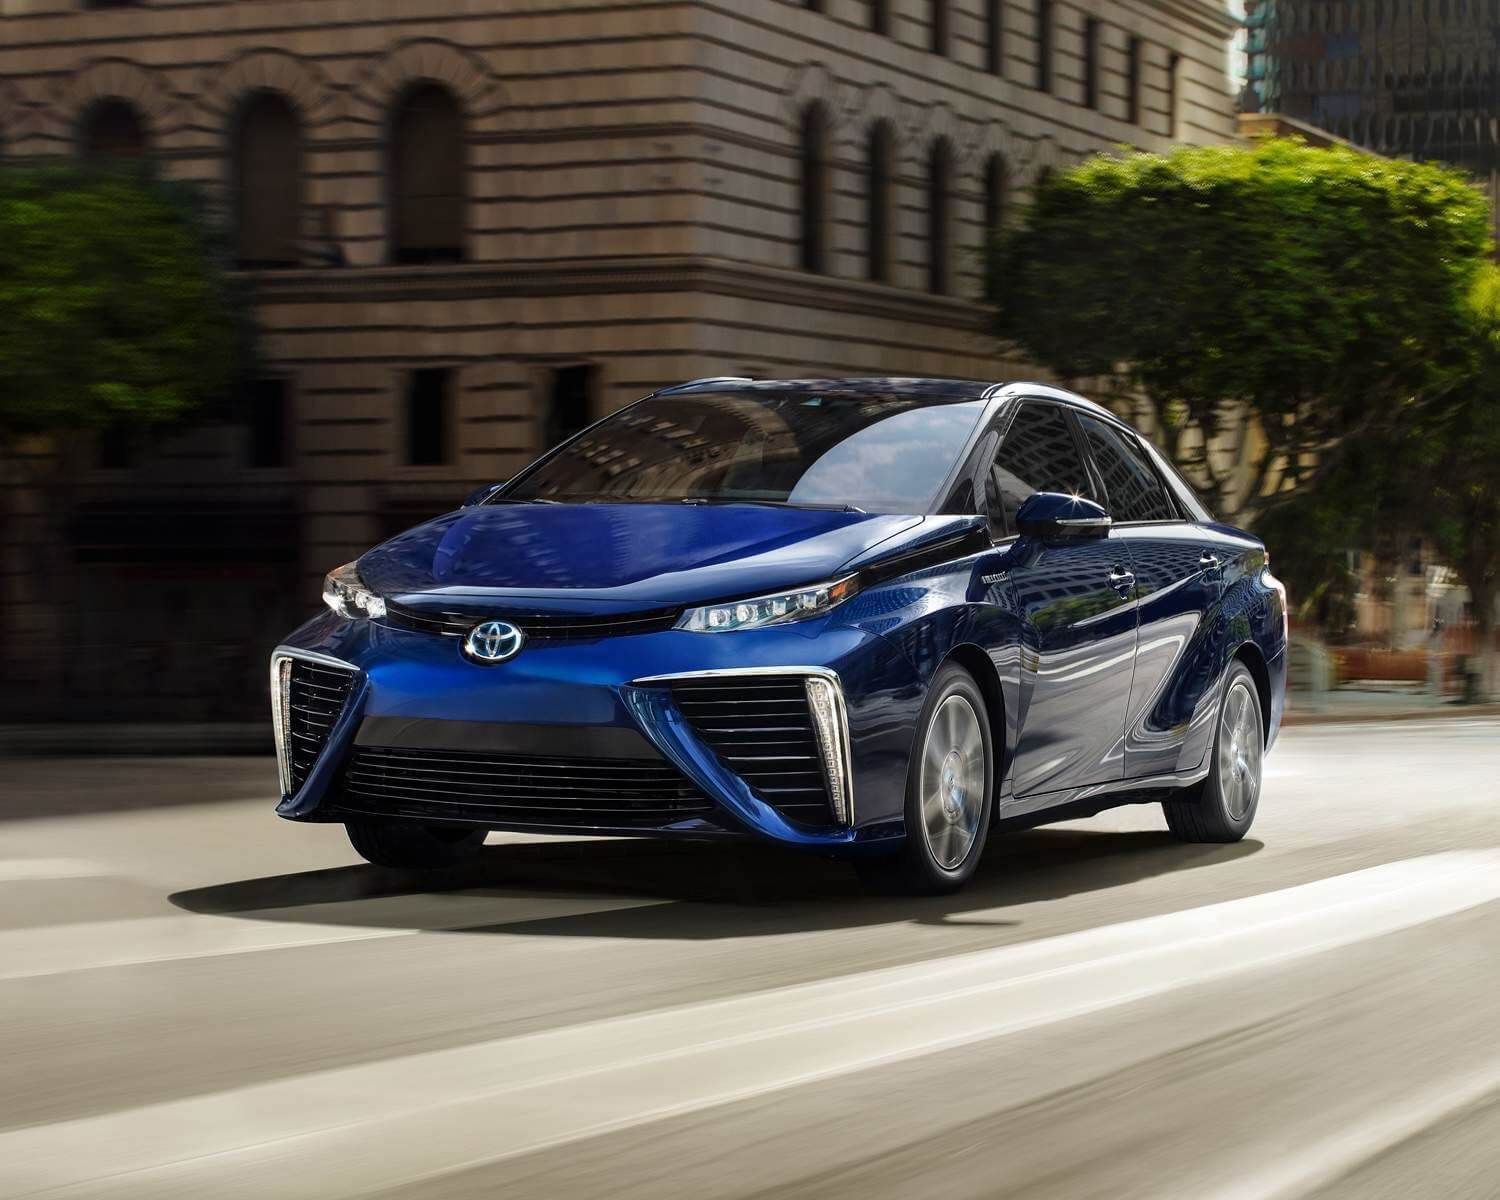 front 3/4 view of a 2020 Toyota Mirai being driven on a road